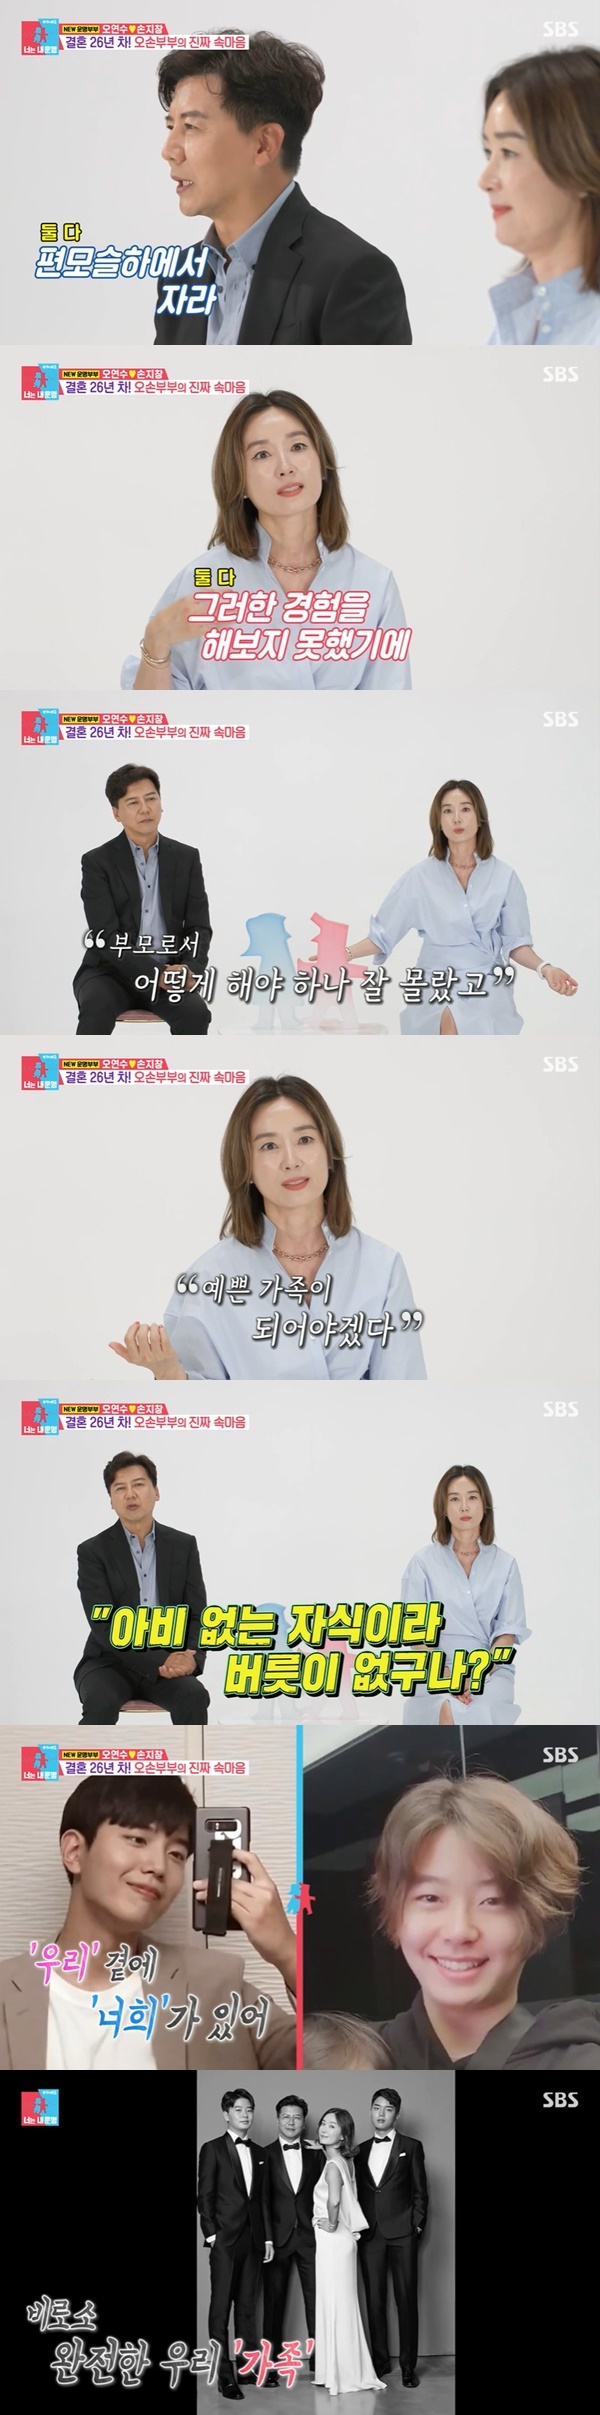 Son Ji Chang Oh Yeon-soo Couple grew up in Flagellumslender bottom and said he was more sincere in his time with two sons.On July 10, SBS  ⁇  Sangmyongmong Season 2 - You told me why Son Ji Chang Oh Yeon-soo Couple wanted to make a more beautiful home in my destiny.On this day, Oh Yeon-soo pinpointed the two sons as Couples Achilles tendon. Currently, the big son went to the United States of America after returning from military service and returned to the third grade.Oh Yeon-soo, who became a family of two in a family of four, thought that the children would come back, but he is practicing because he will not come back to his mothers fathers house and will perform Korean independence movement.I dont think either of them exists, he said.Couple then looked back on his seven years with the two sons in the United States of America. Oh Yeon-soo was very busy before that, because  ⁇ iPads needed to have parents at a critical time.I worked so much that I couldnt take care of my children. When they were over 20 years old, I didnt need my mothers hands, and I thought I would regret missing them. It was too much work, but I decided to put my job down and focus on my children, he said.Seo Jang-hoon said, Its not an easy decision for the whole family to go because of iPads when both of them are active. Oh Yeon-soo did not set  ⁇  7 years.I thought about it for two or three years, but I did not know it would be so long. It was a great time, and I think I have a lot of memories with my kids. The kids always say thank you for being together.I explained that I knew I had come down with my mothers father job.Son Ji Chang grew up in Flagellumslender Bottom, an unstable family that wanted to go to a car buffet as a child.When I looked out on the veranda on the weekend, my family was so envious of going out in the car and telling me about my childhood pain.Oh yeon-soo hadnt had that experience, either, because it wasnt a normal assumption. I didnt really know what to do.Thats why I felt that I had to be a more solid family, and I sympathized with the pain of Son Ji Chang.Son Ji Chang said, I did not want to be too much because I did not have enough children or anything. I hated the story that I hated the most when I was a child.Son Ji Chang was generous to his children because he didnt want them to be rude in front of others, but there was a part of our iPads that was tight. It might have been stressful for the iPads, but theyve grown up well now. My eldest told me that story.I think it would have been possible if Father had not been scolded at that time. When I heard that, I expressed my gratitude to the iPads who grew up well.Son Ji Chang also confessed to his wife Oh Yeon-soo that he had been doing a lot for 25 years, but thanks to his wisdom, he will continue to work hard.